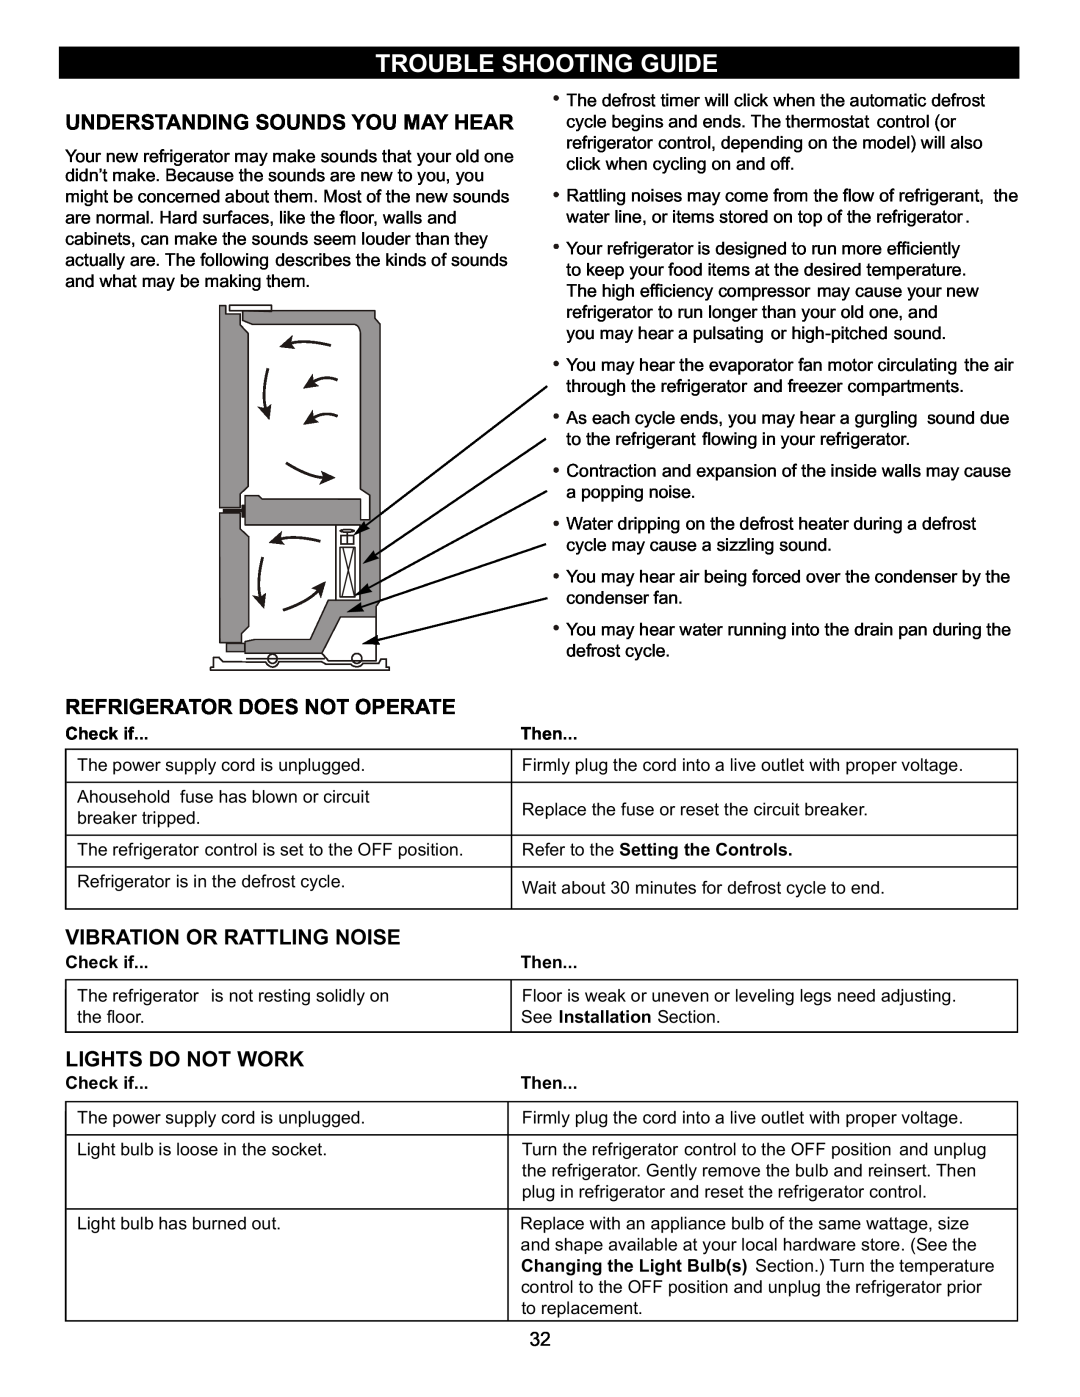 LG Electronics MFL47277003 Trouble Shooting Guide, Understanding Sounds You May Hear, Refrigerator Does Not Operate 